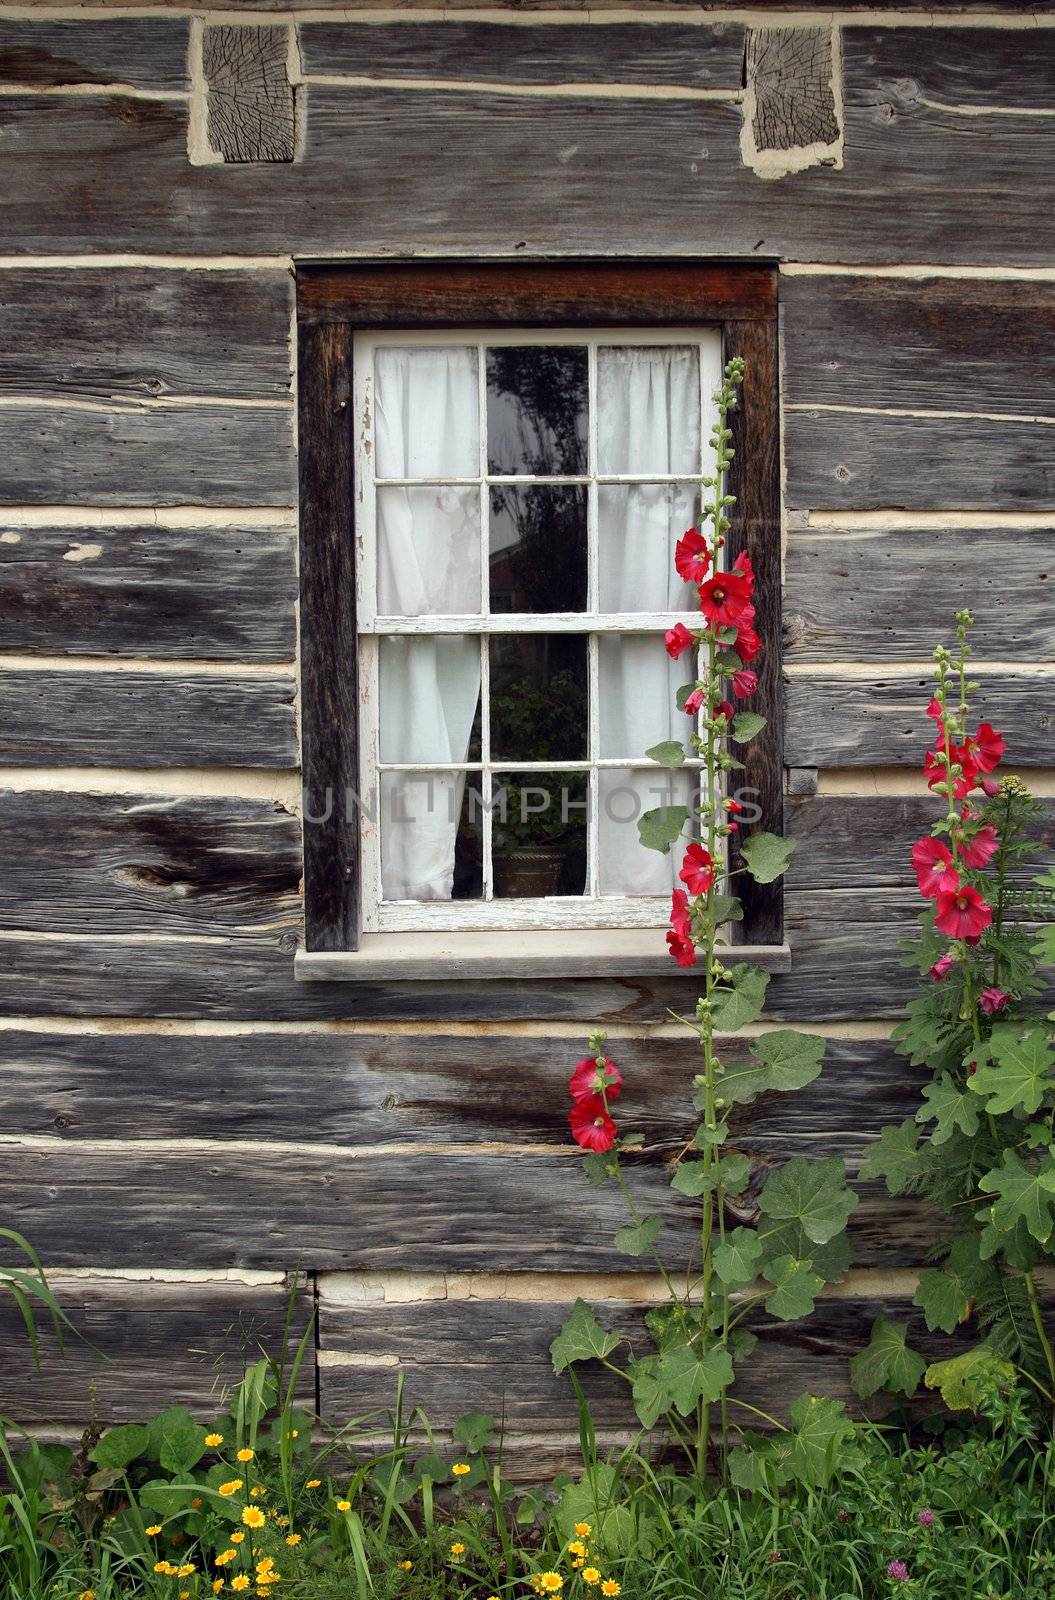 Window of a wooden country house with red malva flowers growing near it.